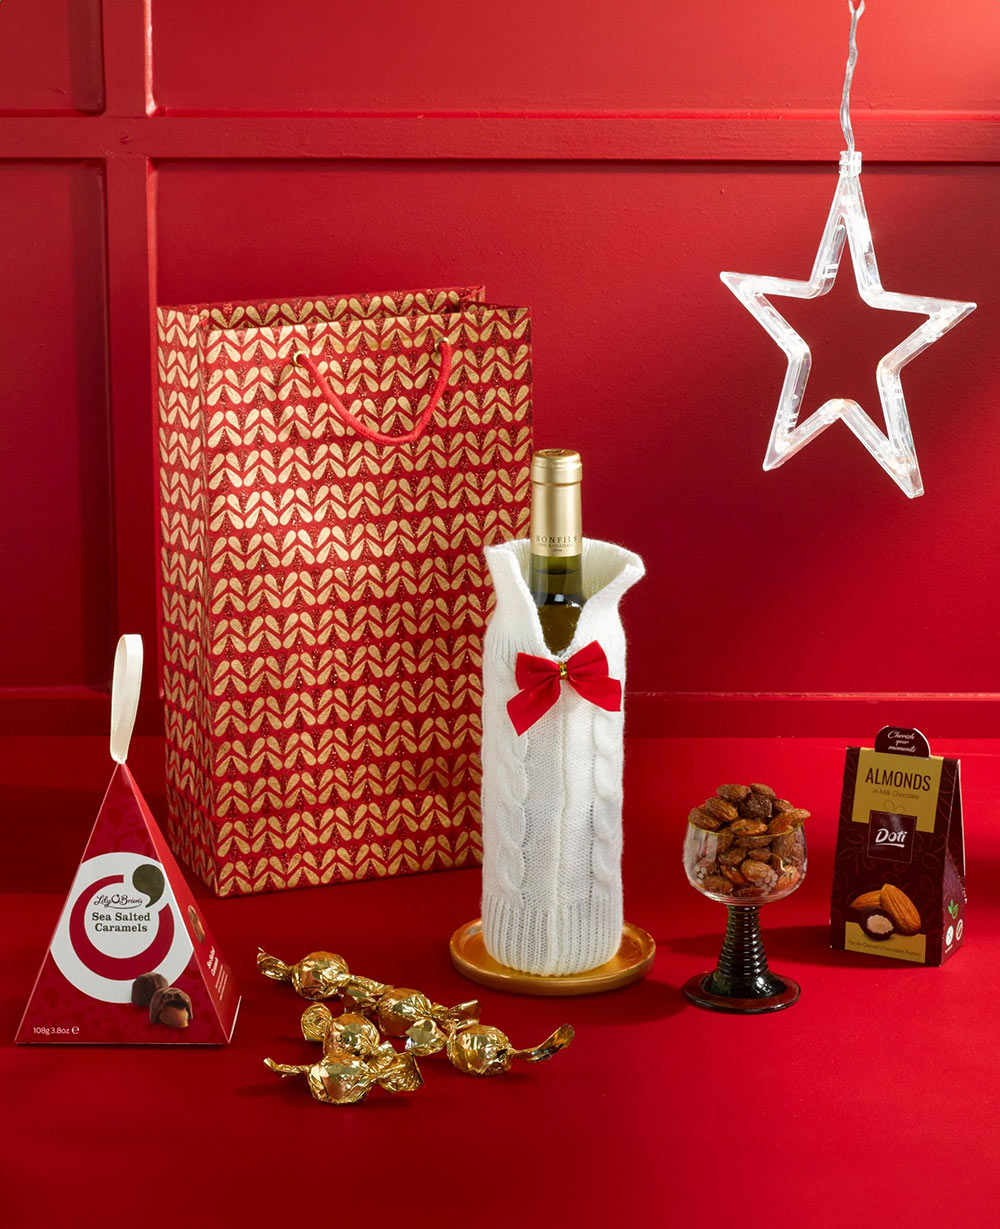 Festive Thanks with White Wine Gift Bag<br/>(Corporate Gifts)